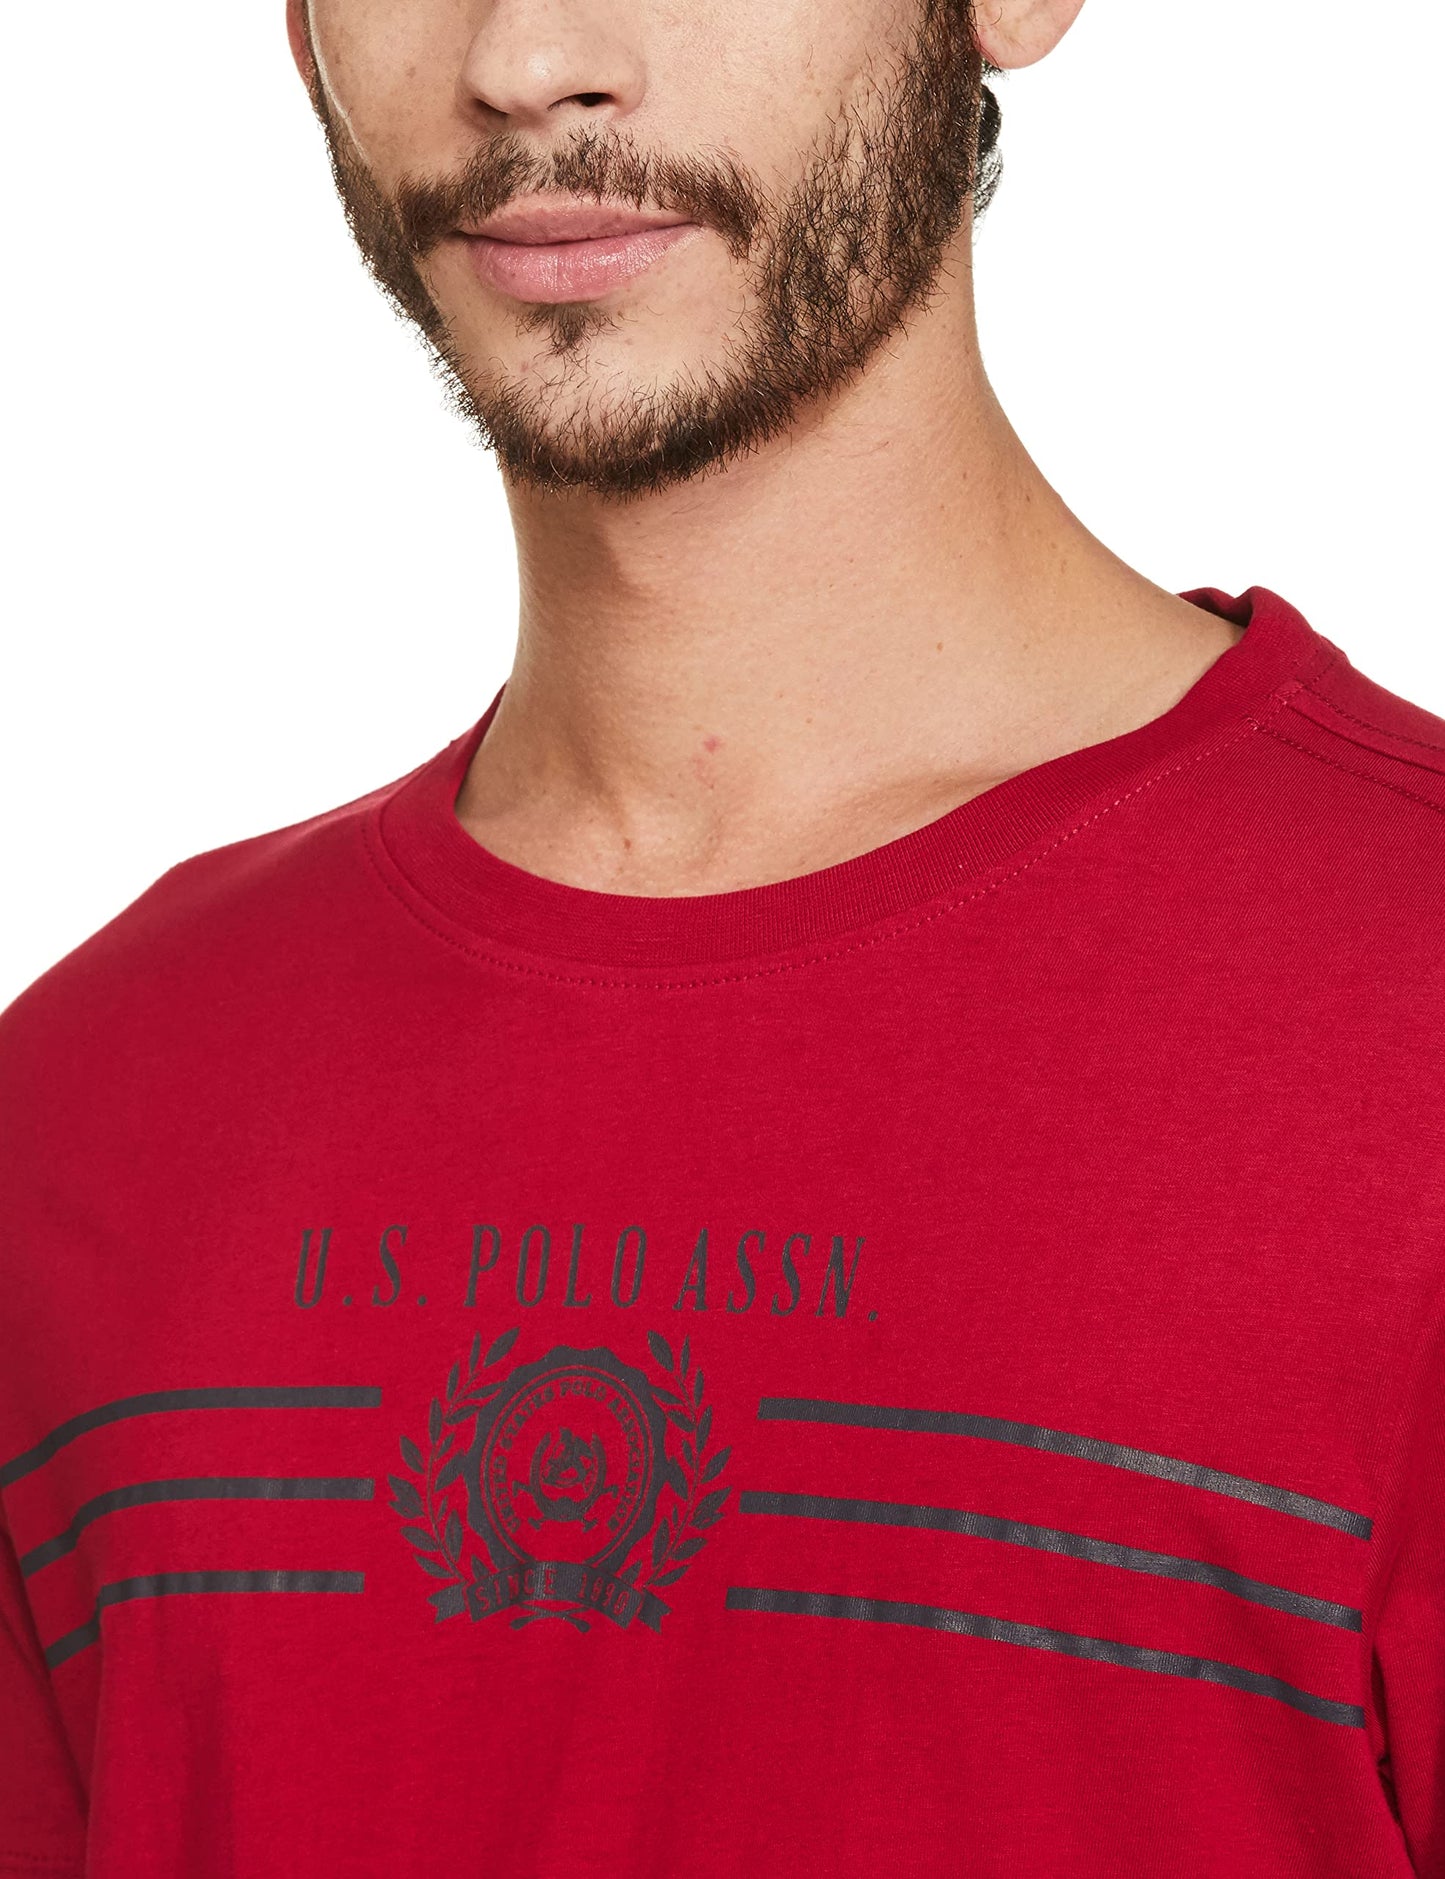 US Polo ASSN. Half Sleeve Round Neck T Shirts, L (USTSHS1371_Red_L)